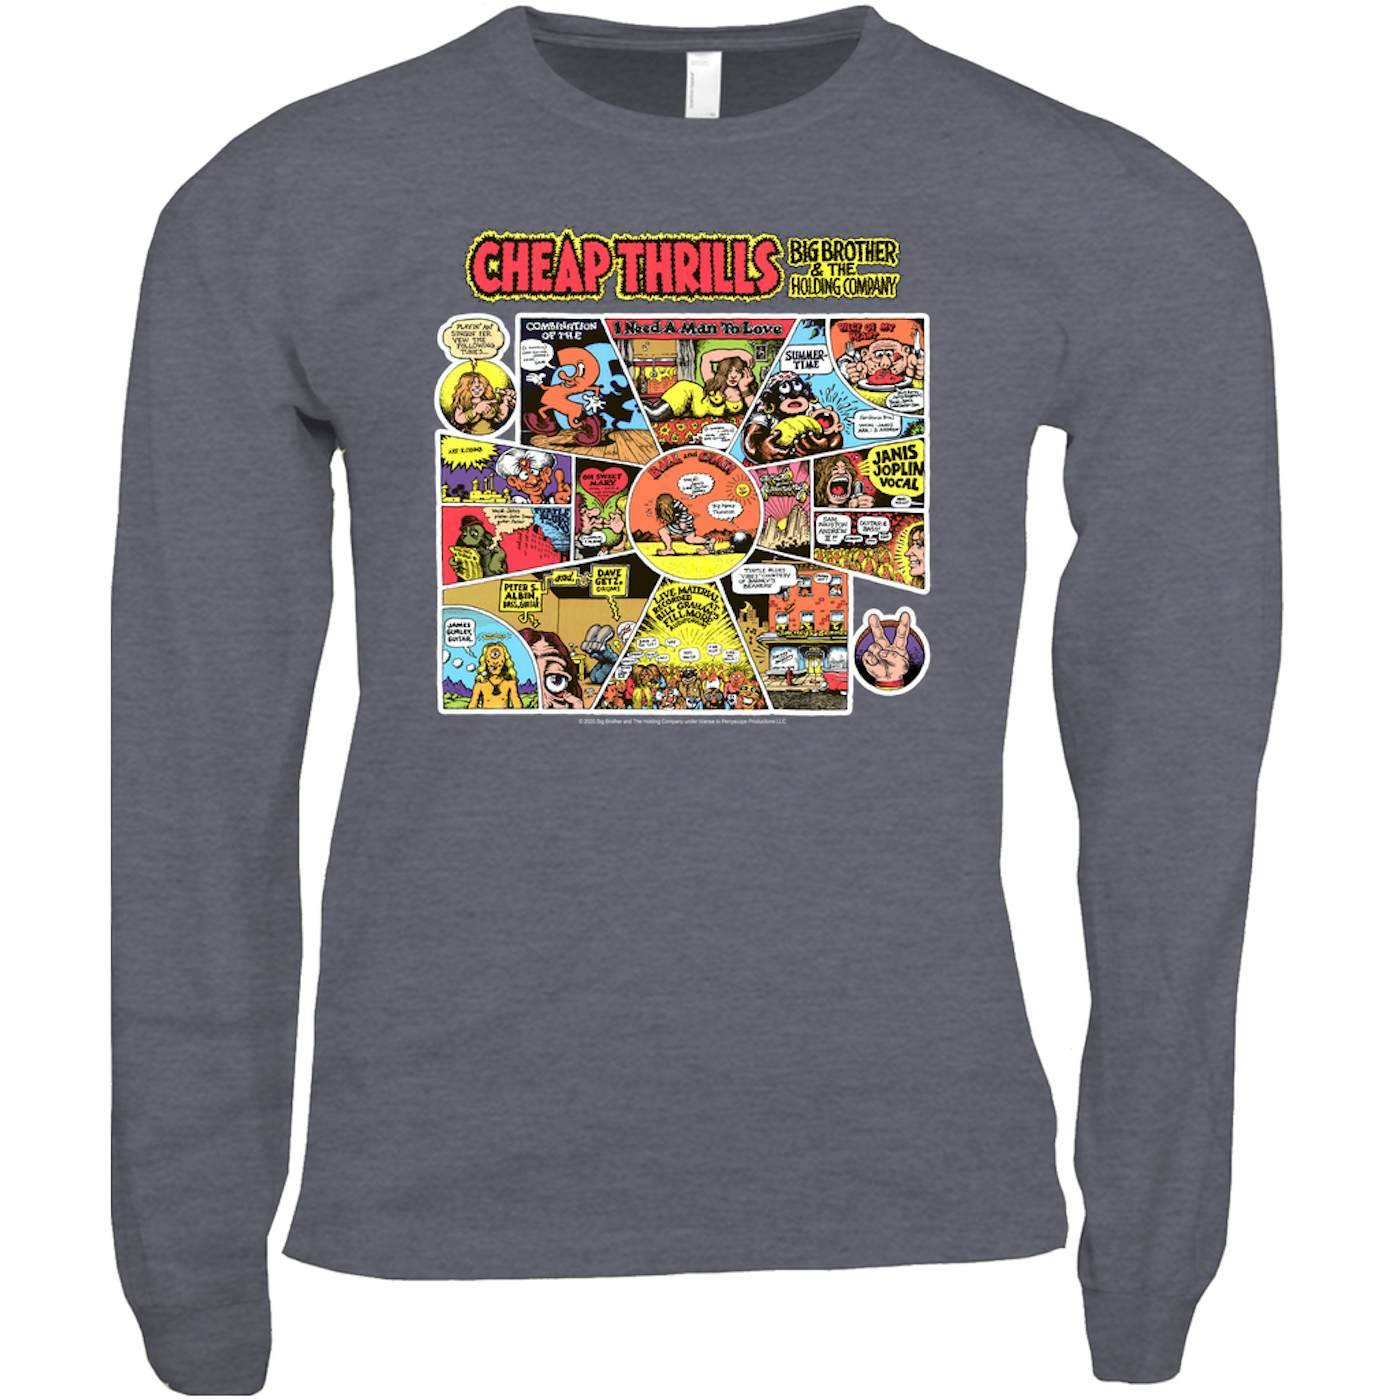 Big Brother & The Holding Company Long Sleeve Shirt | Cheap Thrills Album Cover Big Brother and The Holding Company Shirt